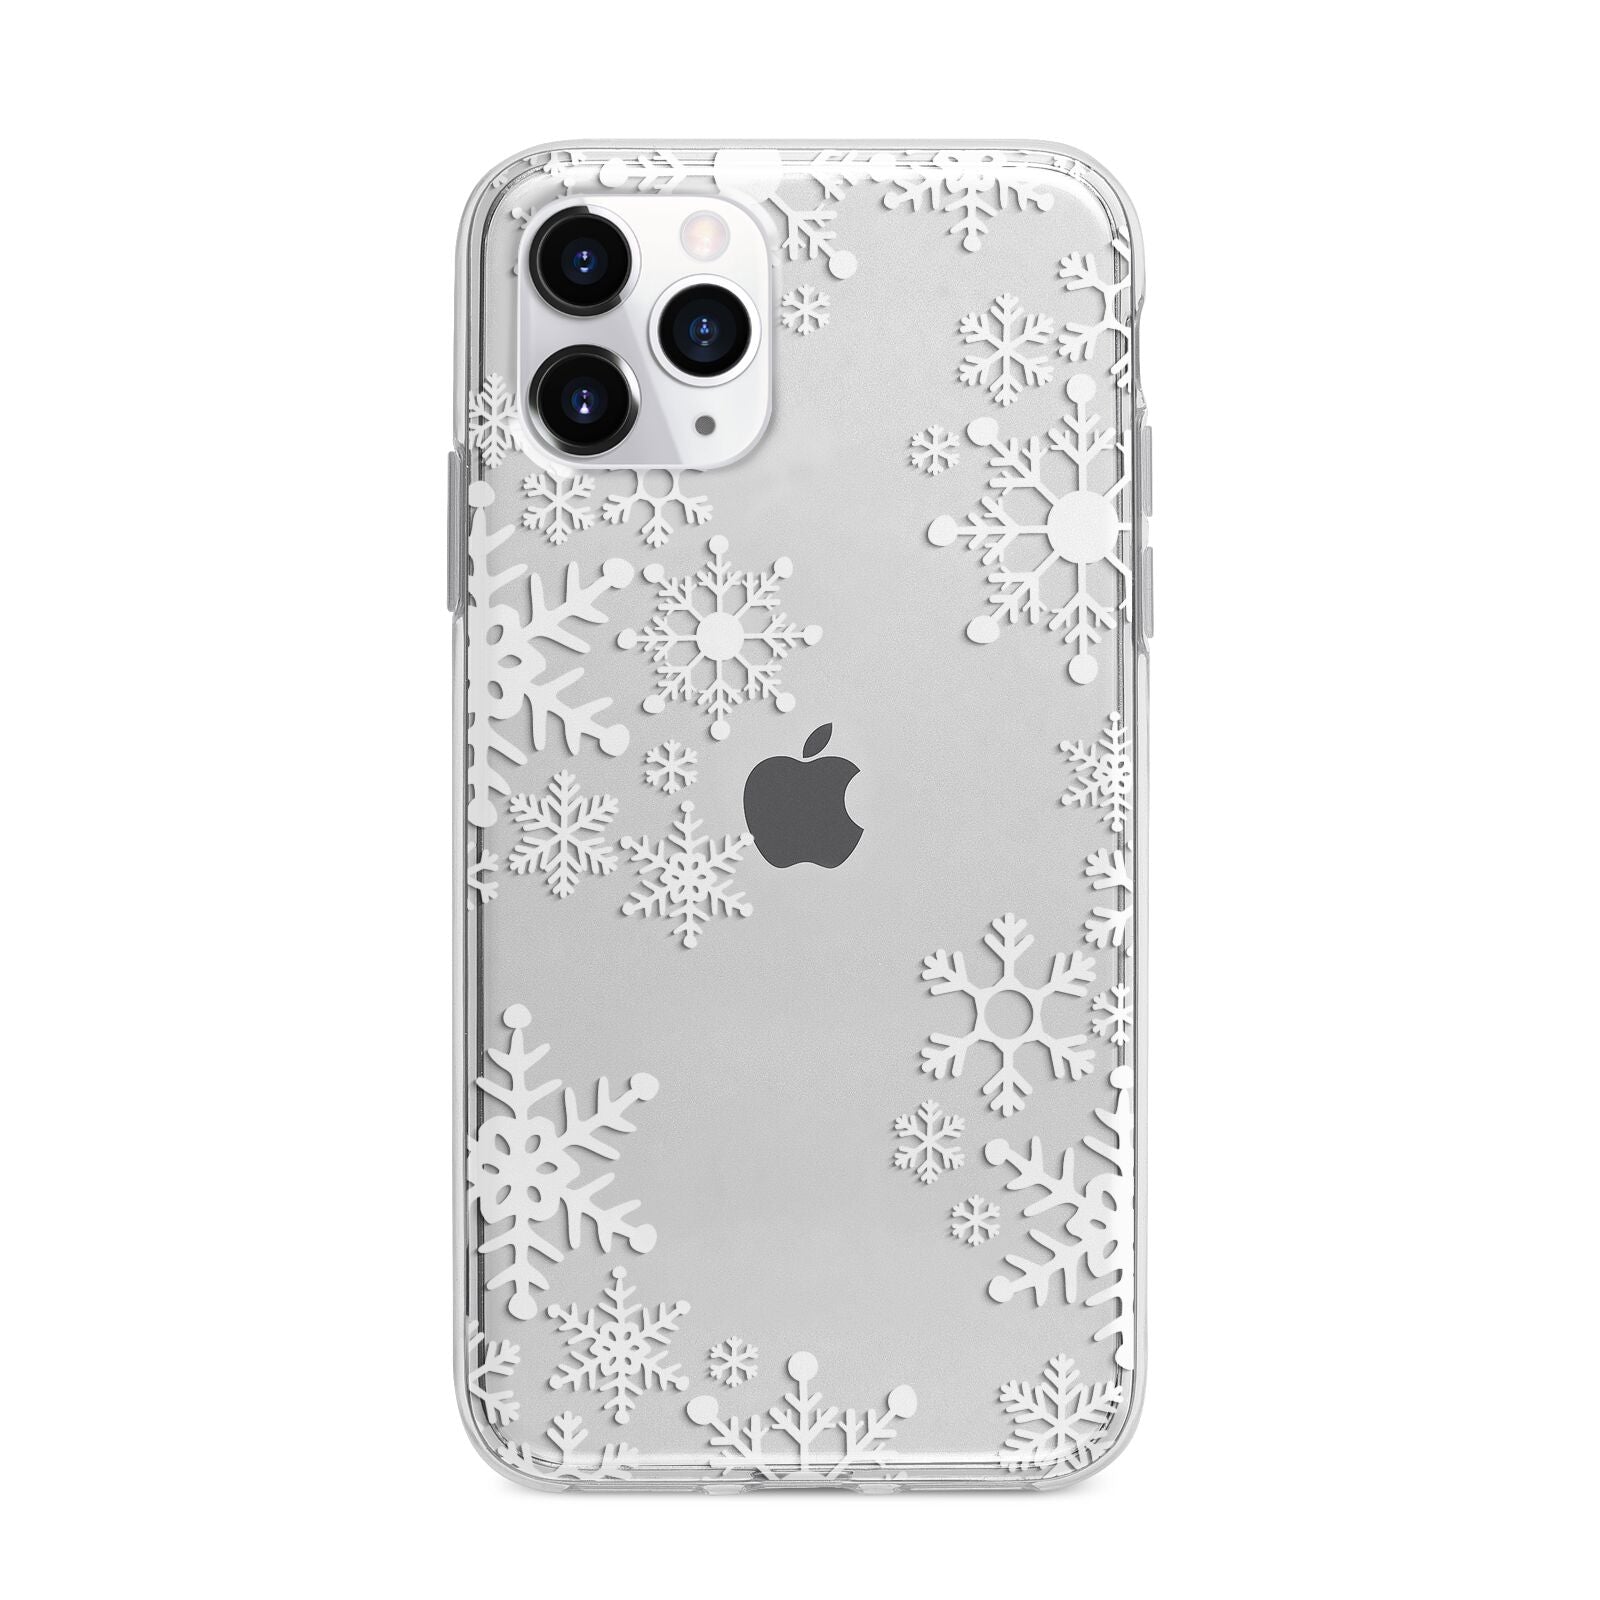 Snowflake Apple iPhone 11 Pro Max in Silver with Bumper Case